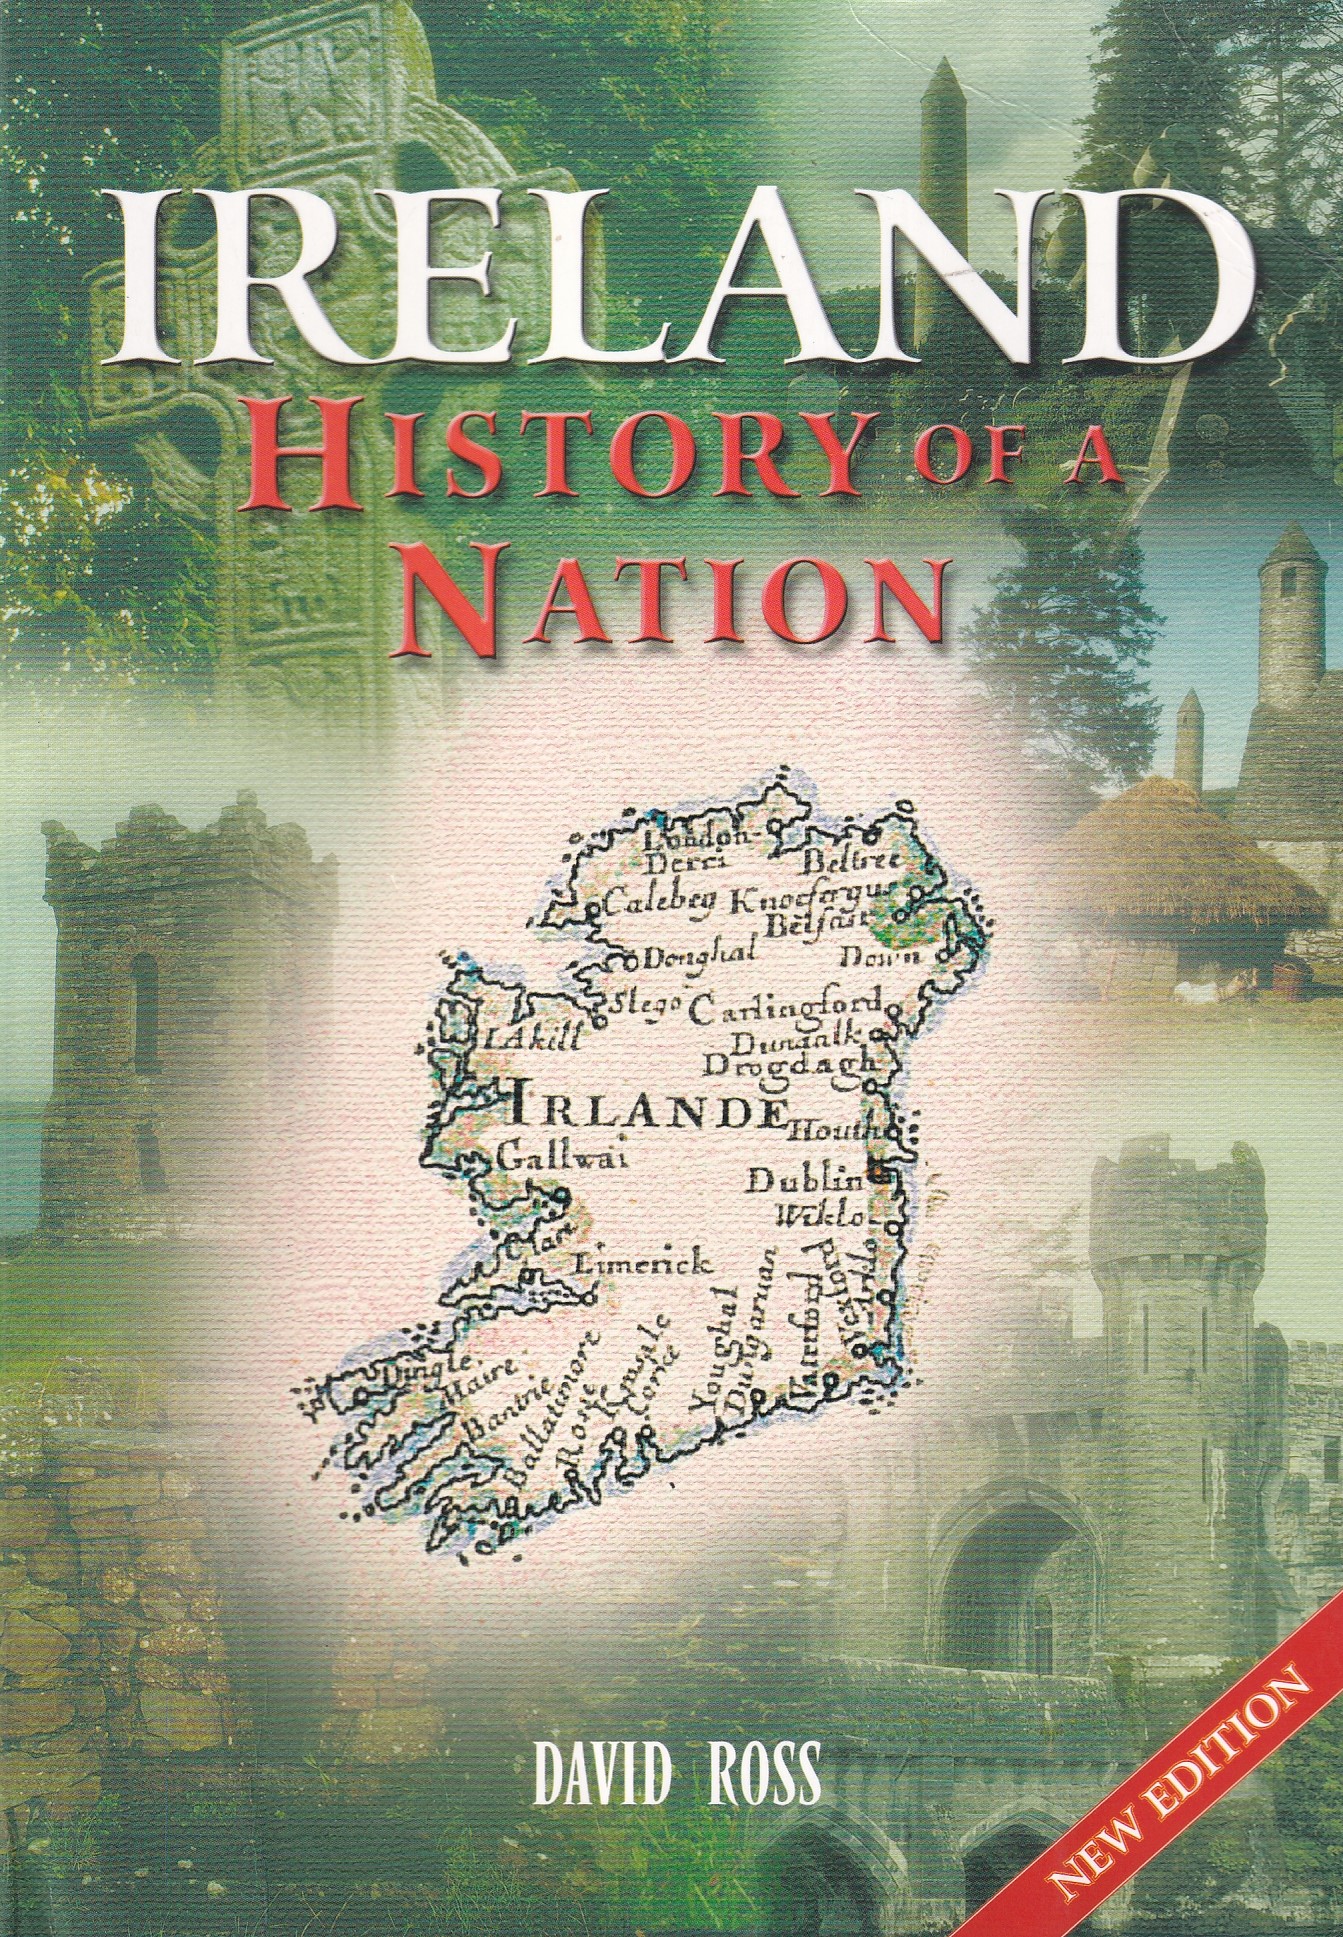 Ireland: History of a Nation | David Ross | Charlie Byrne's